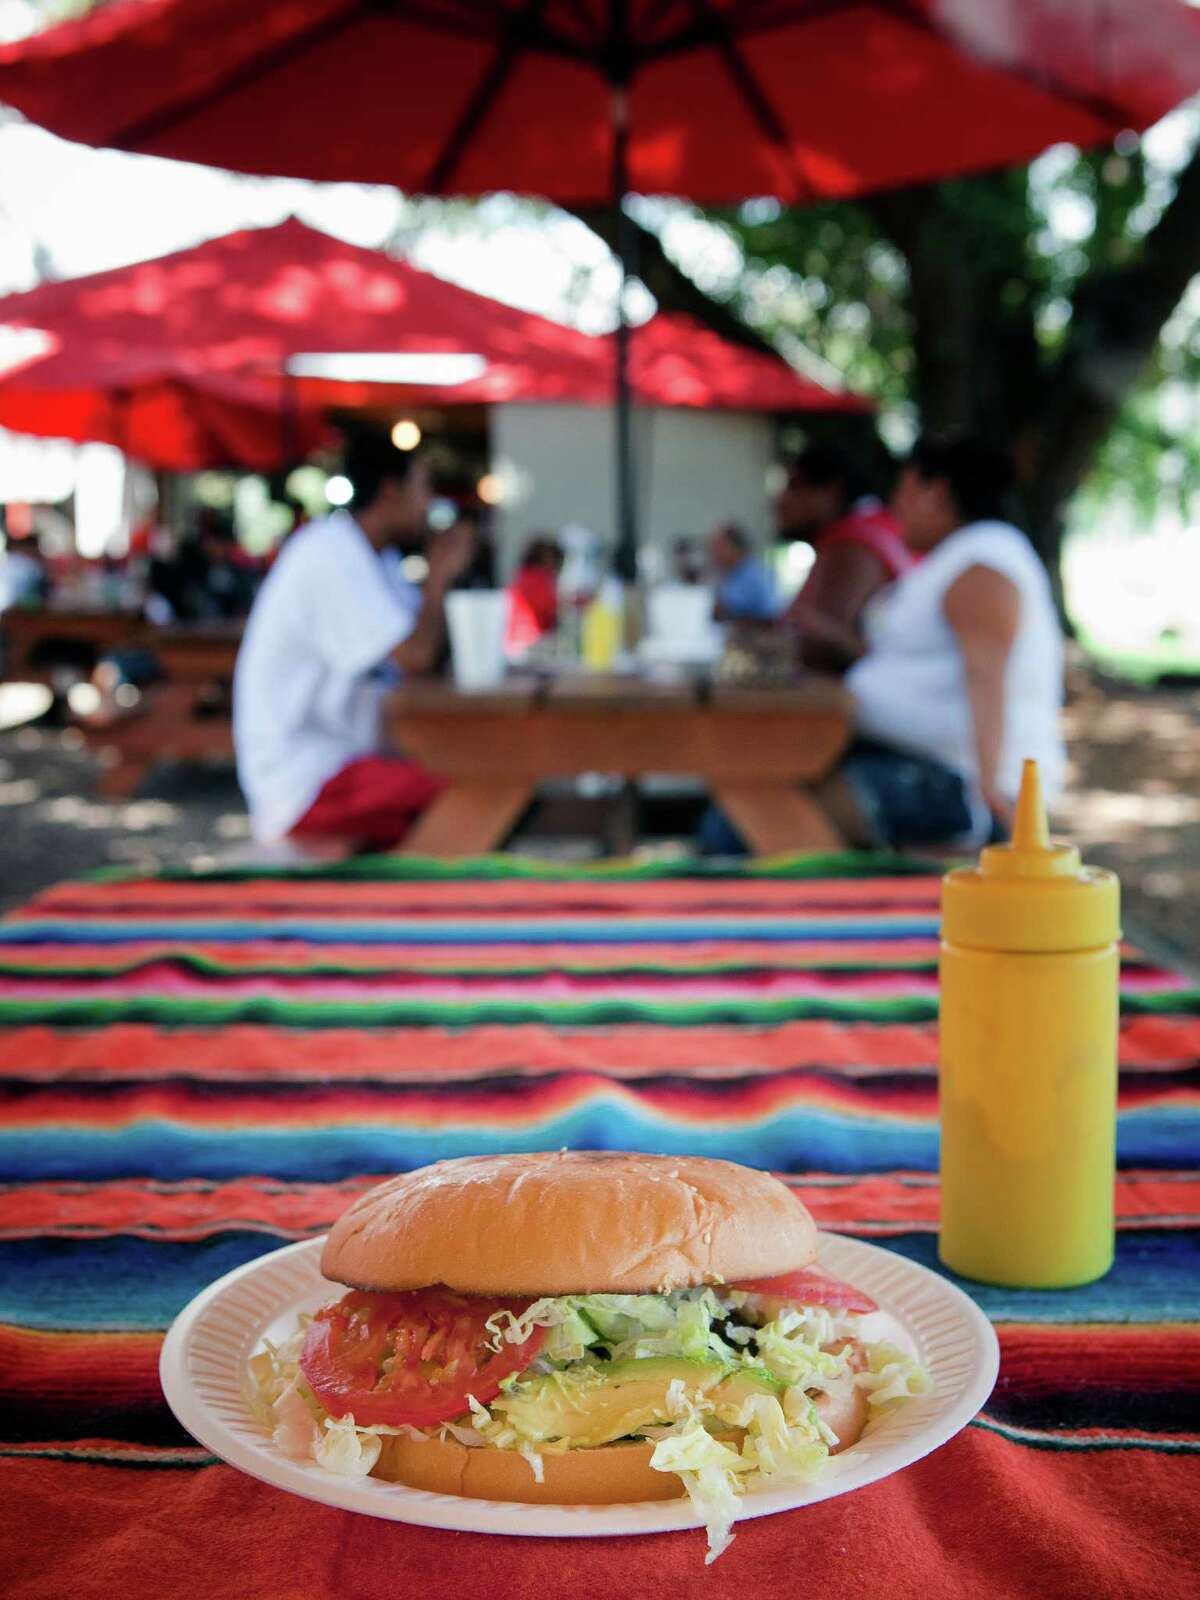 Images of Karancho's taco camp in Channelview, Texas taken on Saturday, July 30, 2011. (Todd Spoth for the Chronicle)